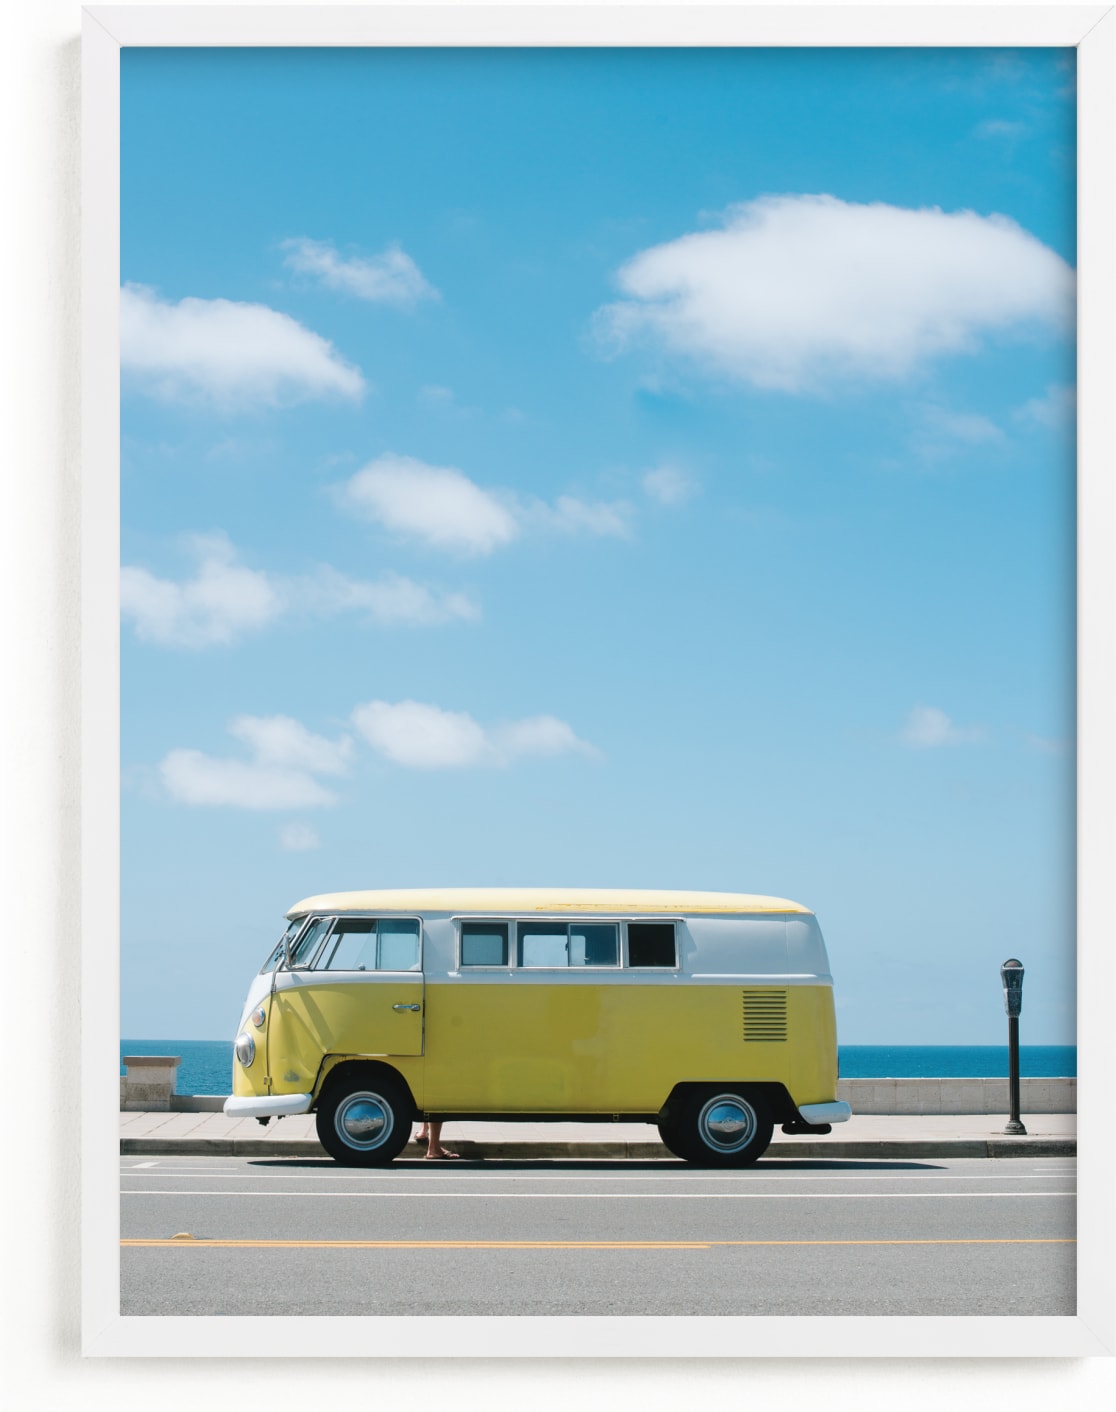 This is a blue art by Jennifer Little called Yellow Van II.